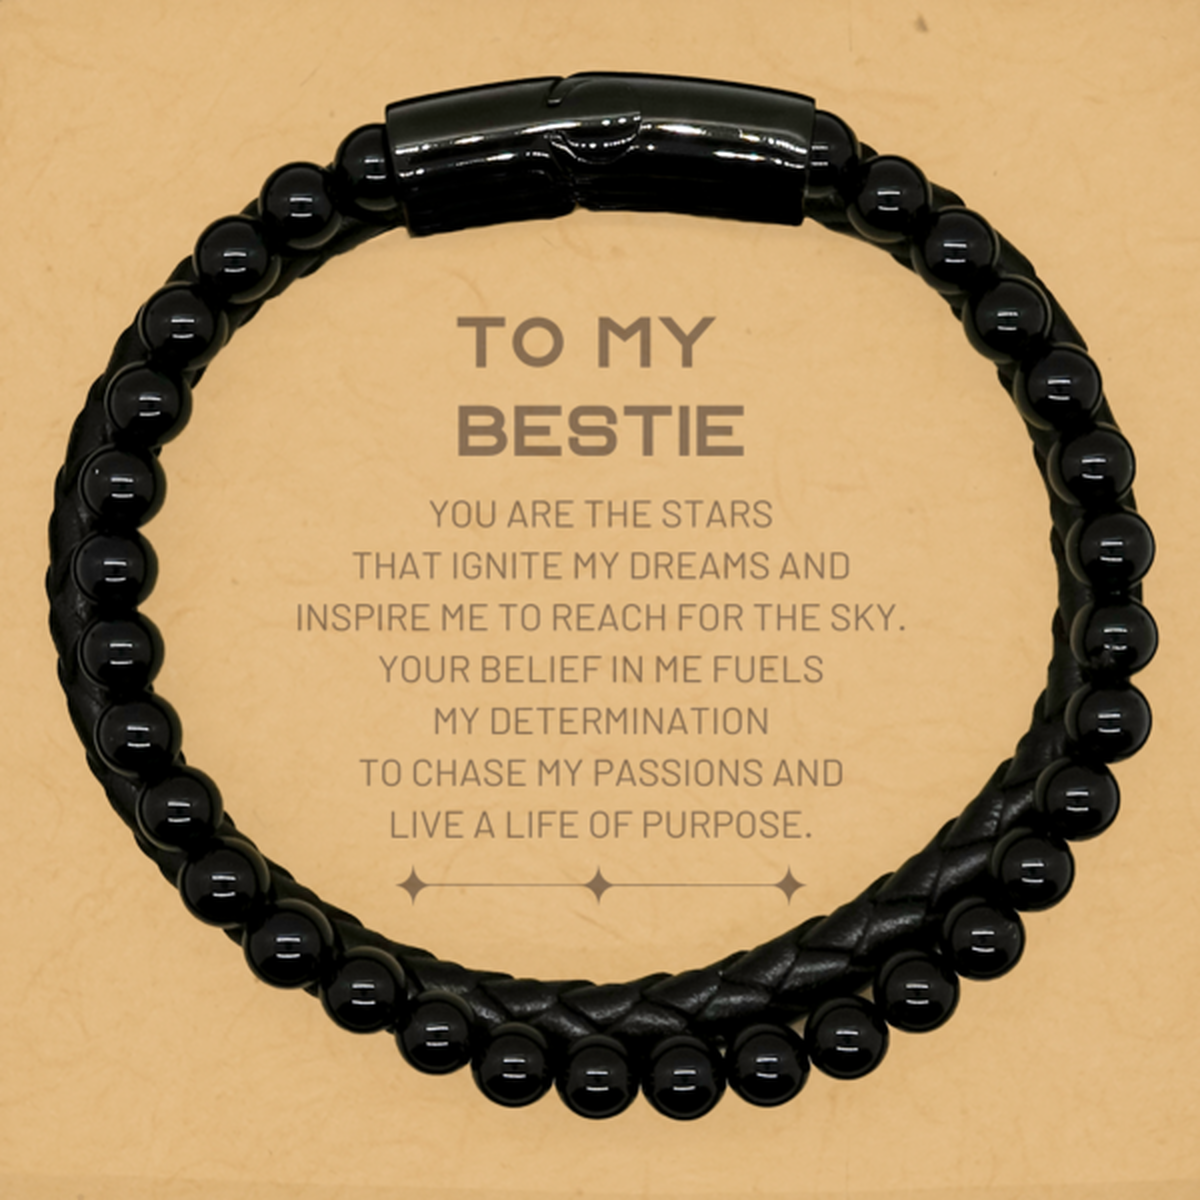 To My Bestie Stone Leather Bracelets, You are the stars that ignite my dreams and inspire me to reach for the sky, Birthday Unique Gifts For Bestie, Thank You Gifts For Bestie